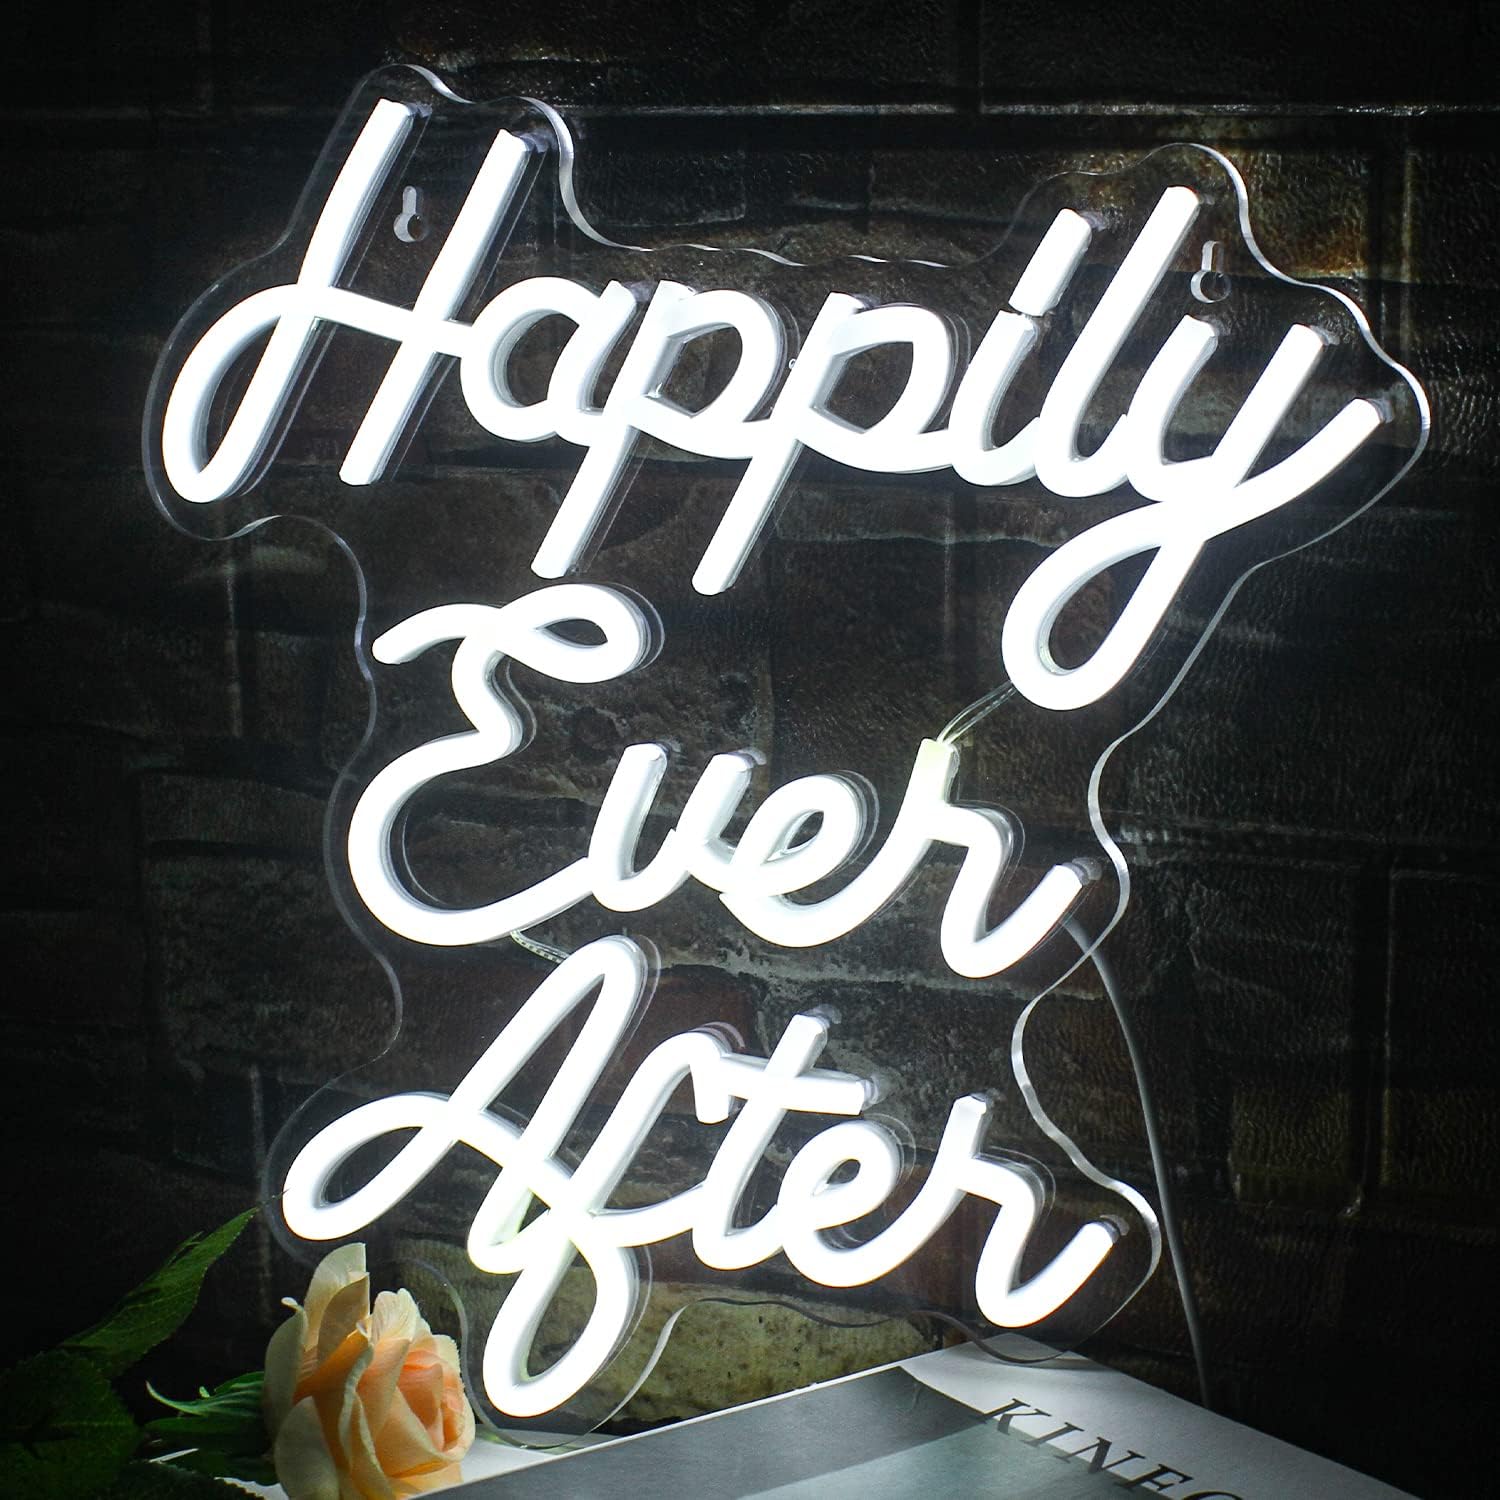 NEONIP-100% Handmade Happily Ever After LED Neon Light Sign